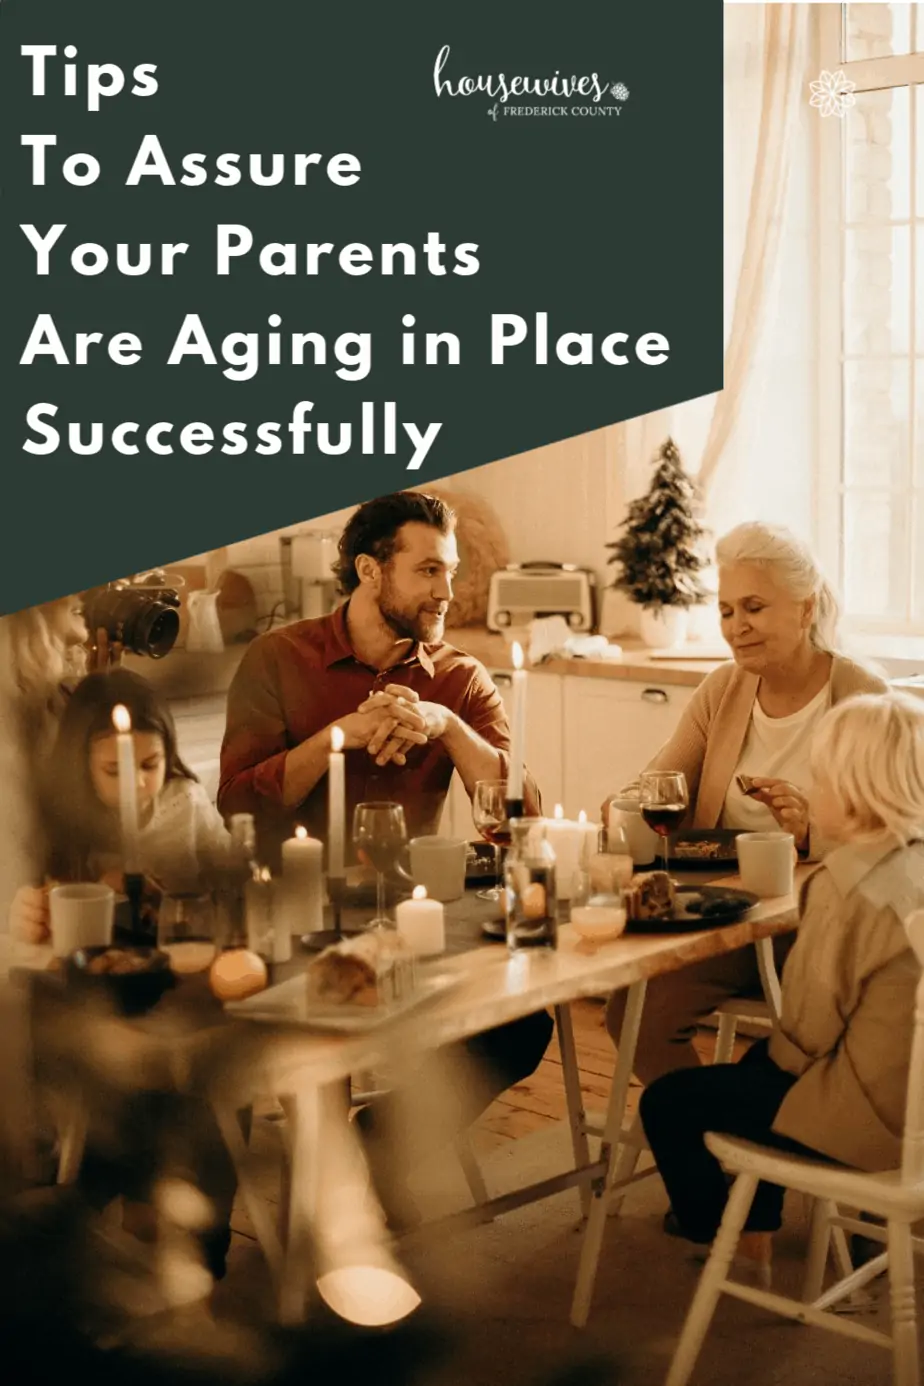 Tips To Assure Your Parents Are Aging in Place Successfully